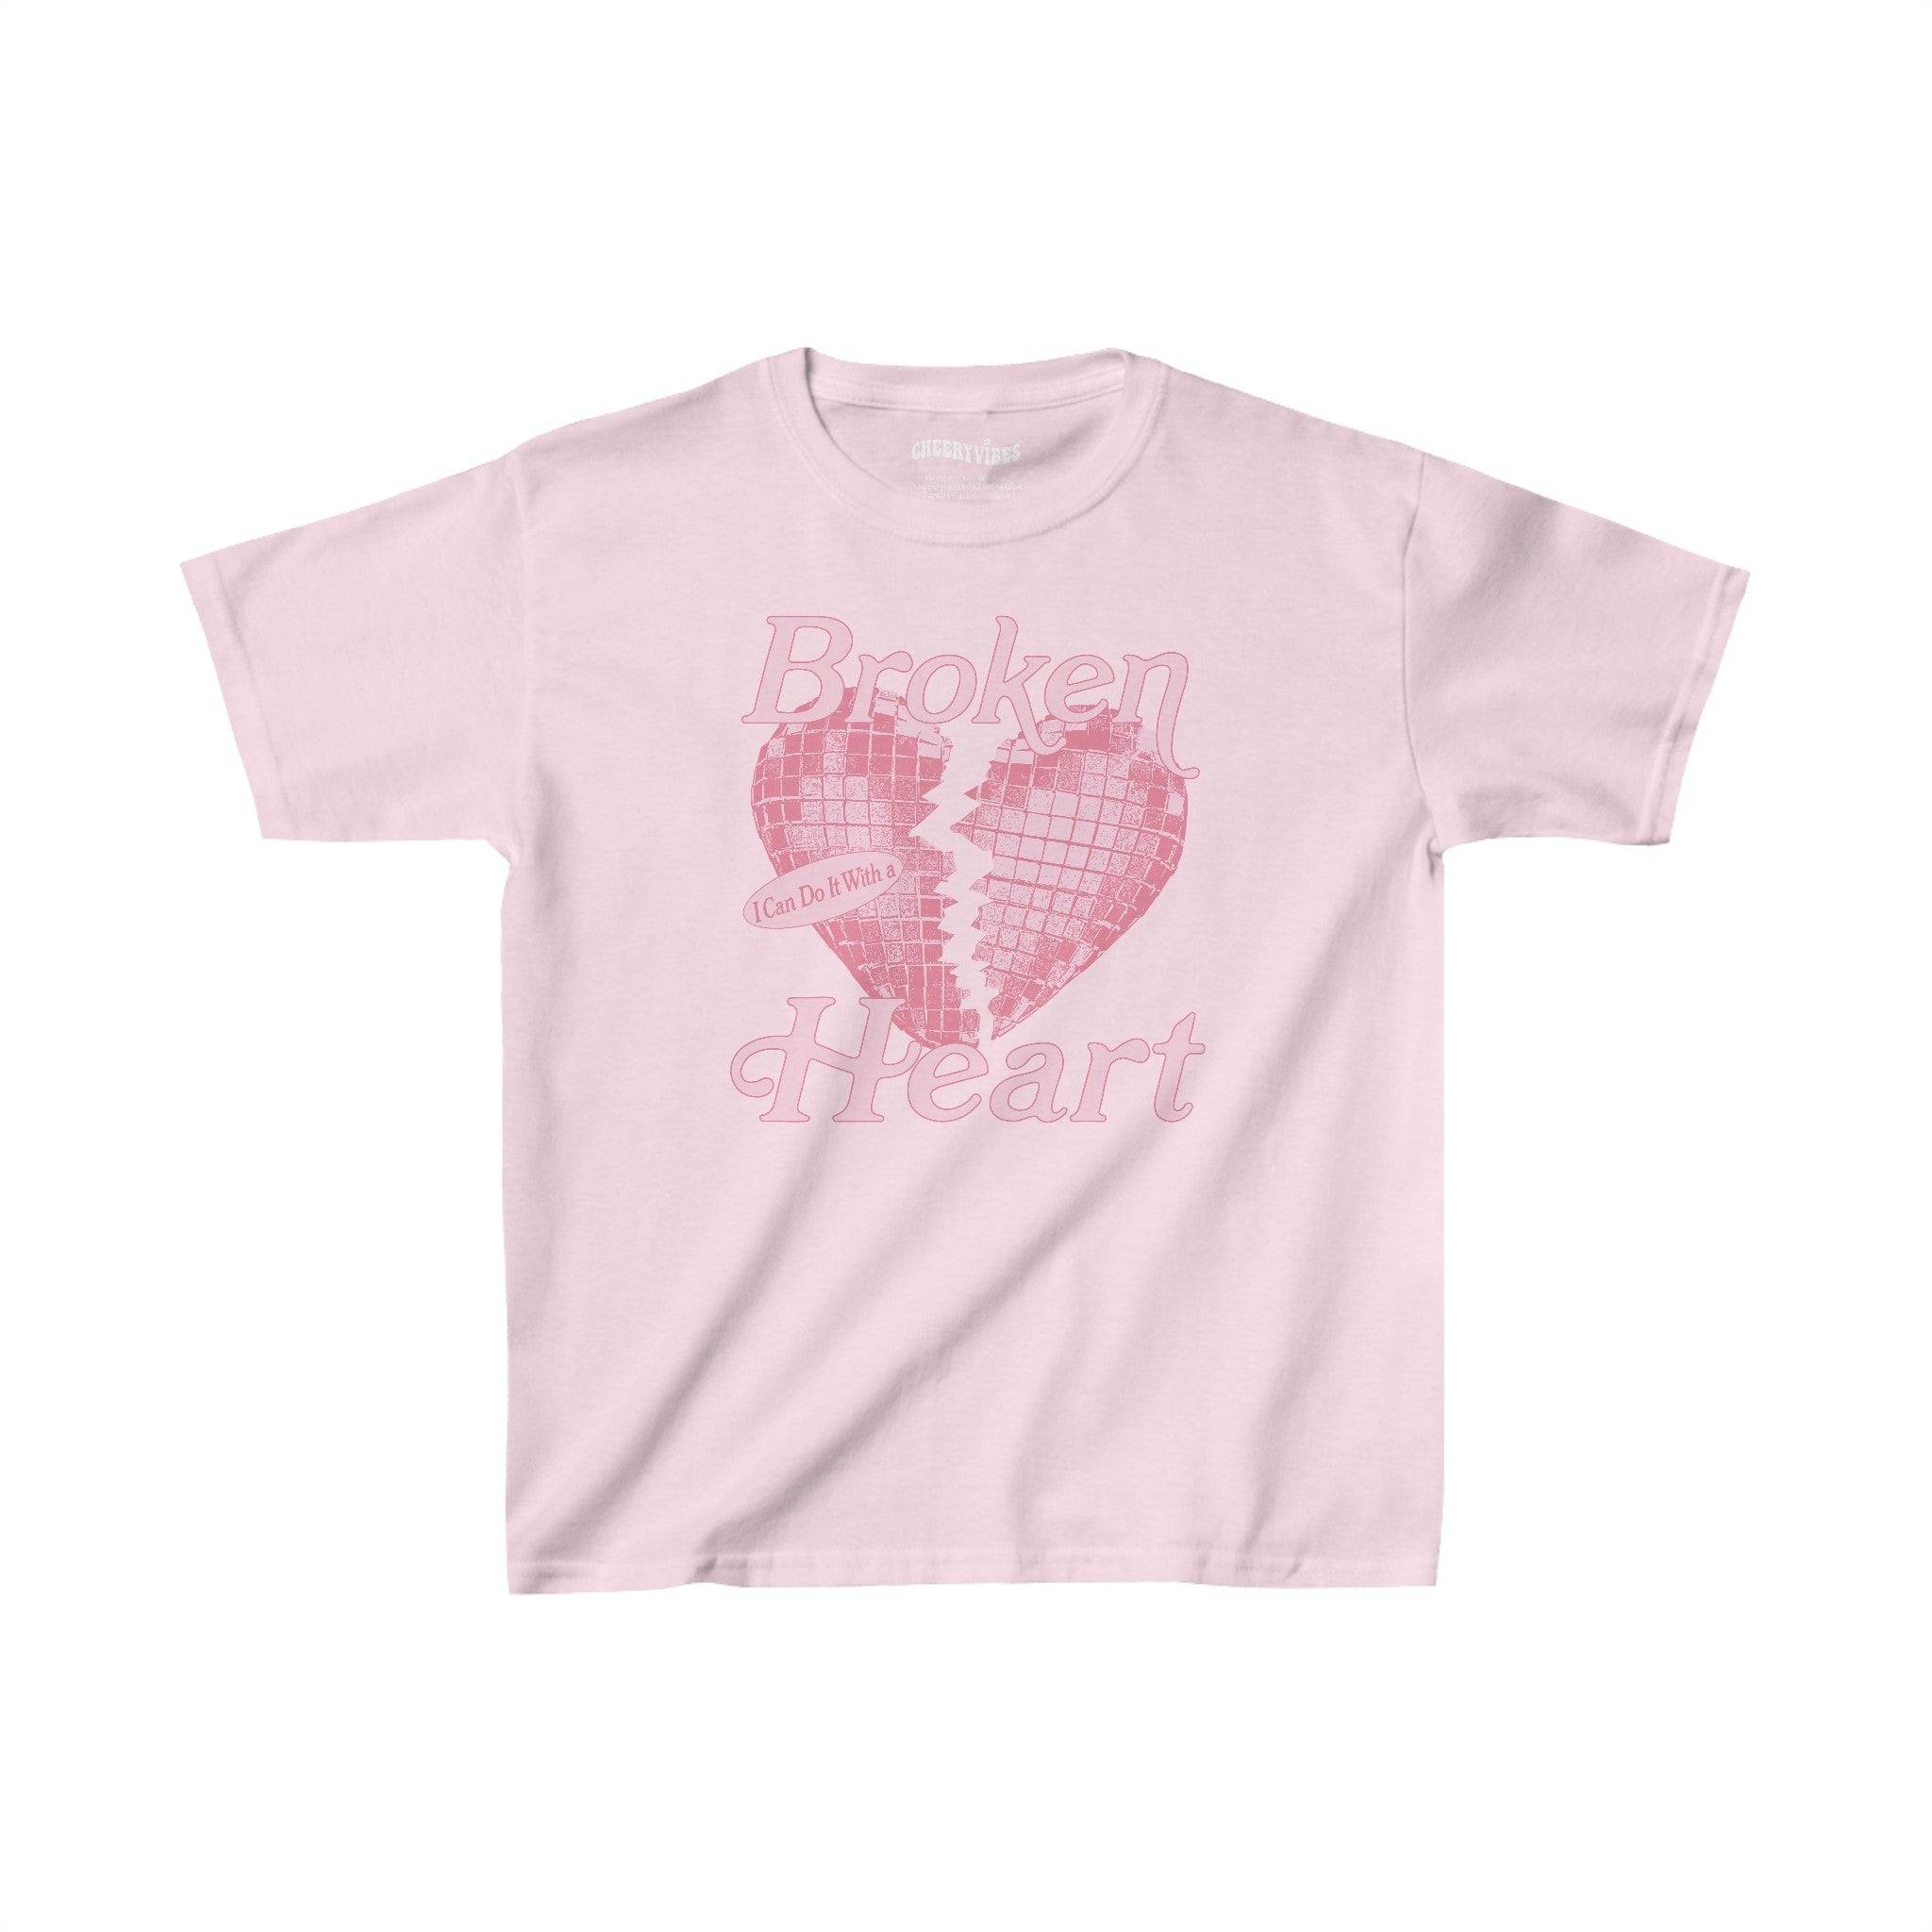 I can do it with a broken heart baby tee - CheeryVibes